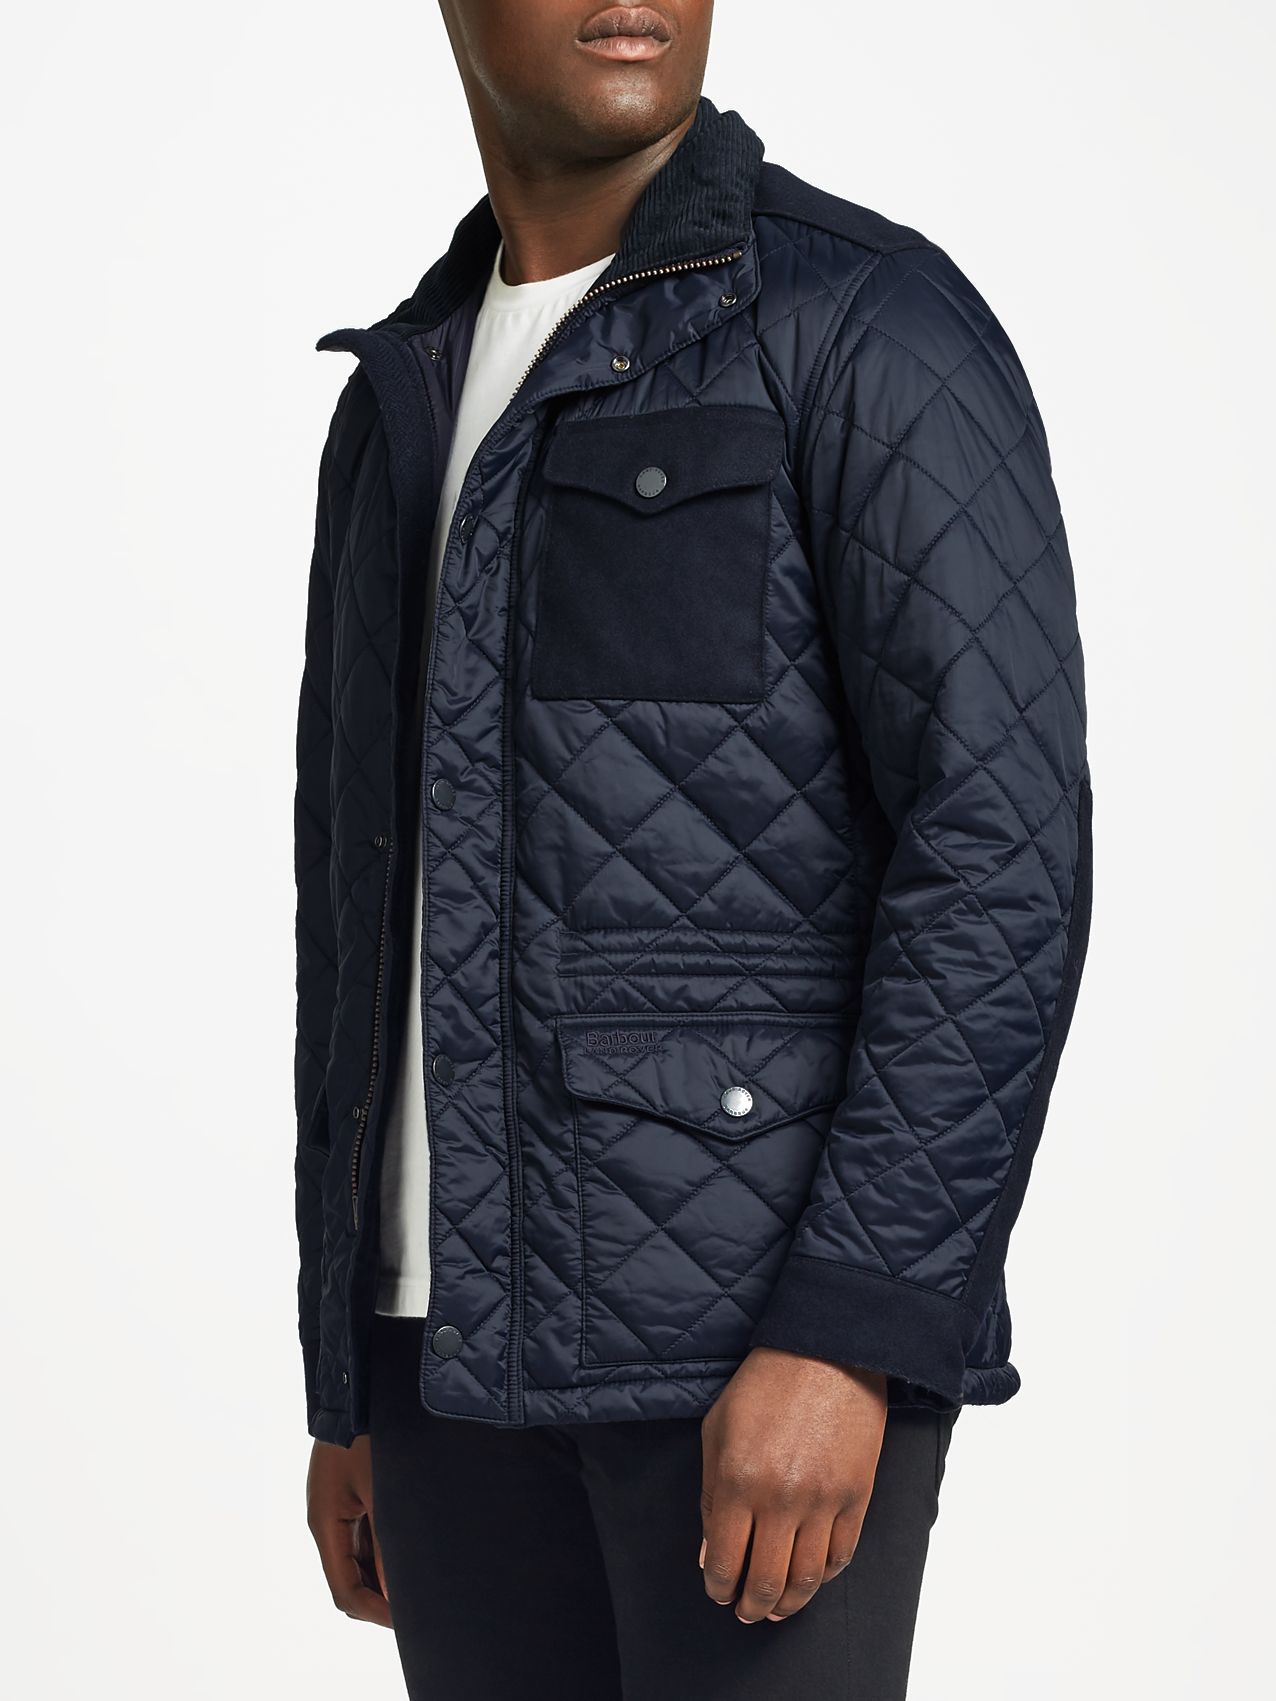 barbour land rover jacket